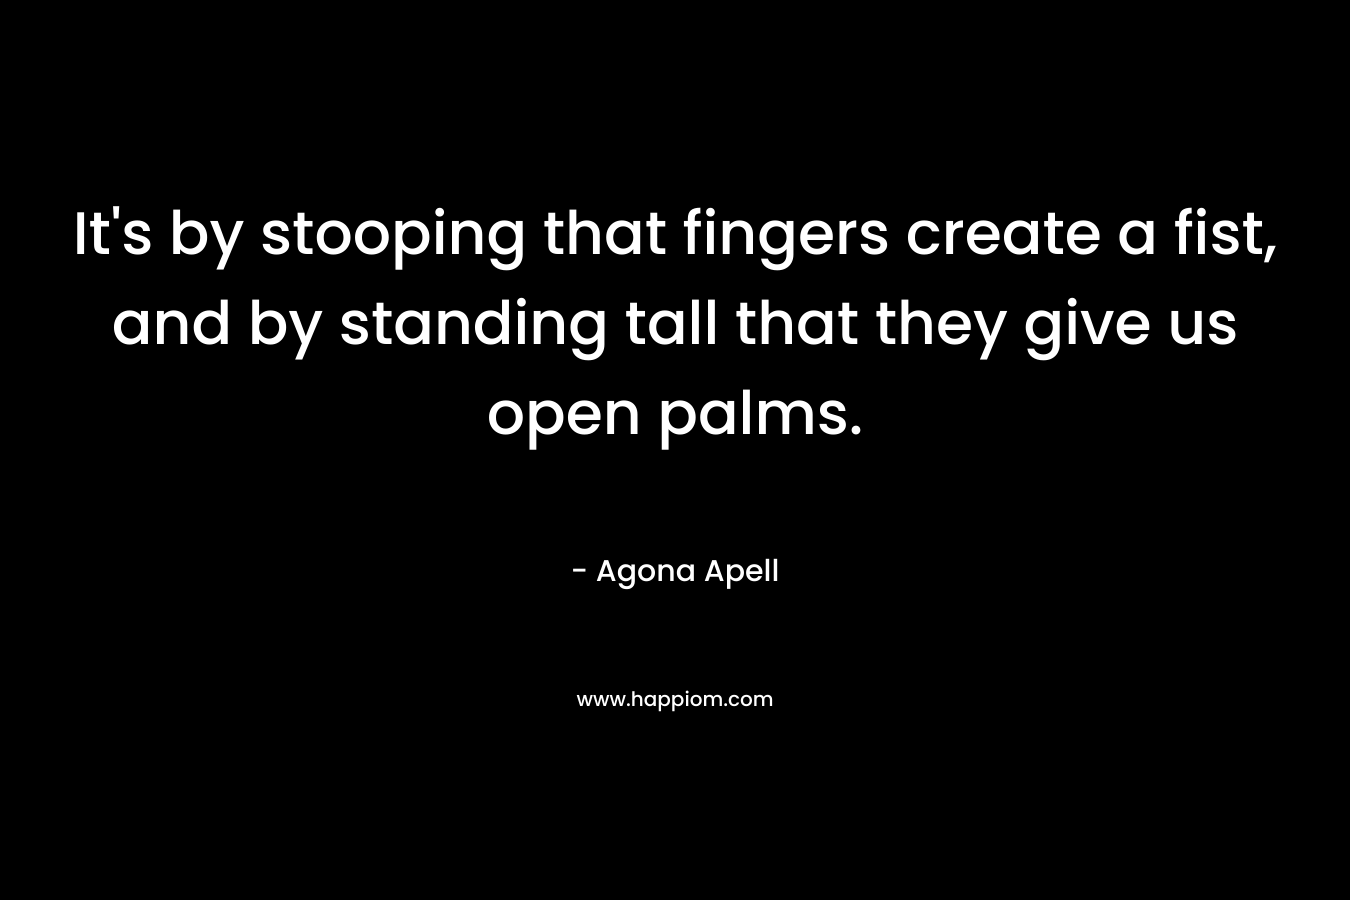 It’s by stooping that fingers create a fist, and by standing tall that they give us open palms. – Agona Apell